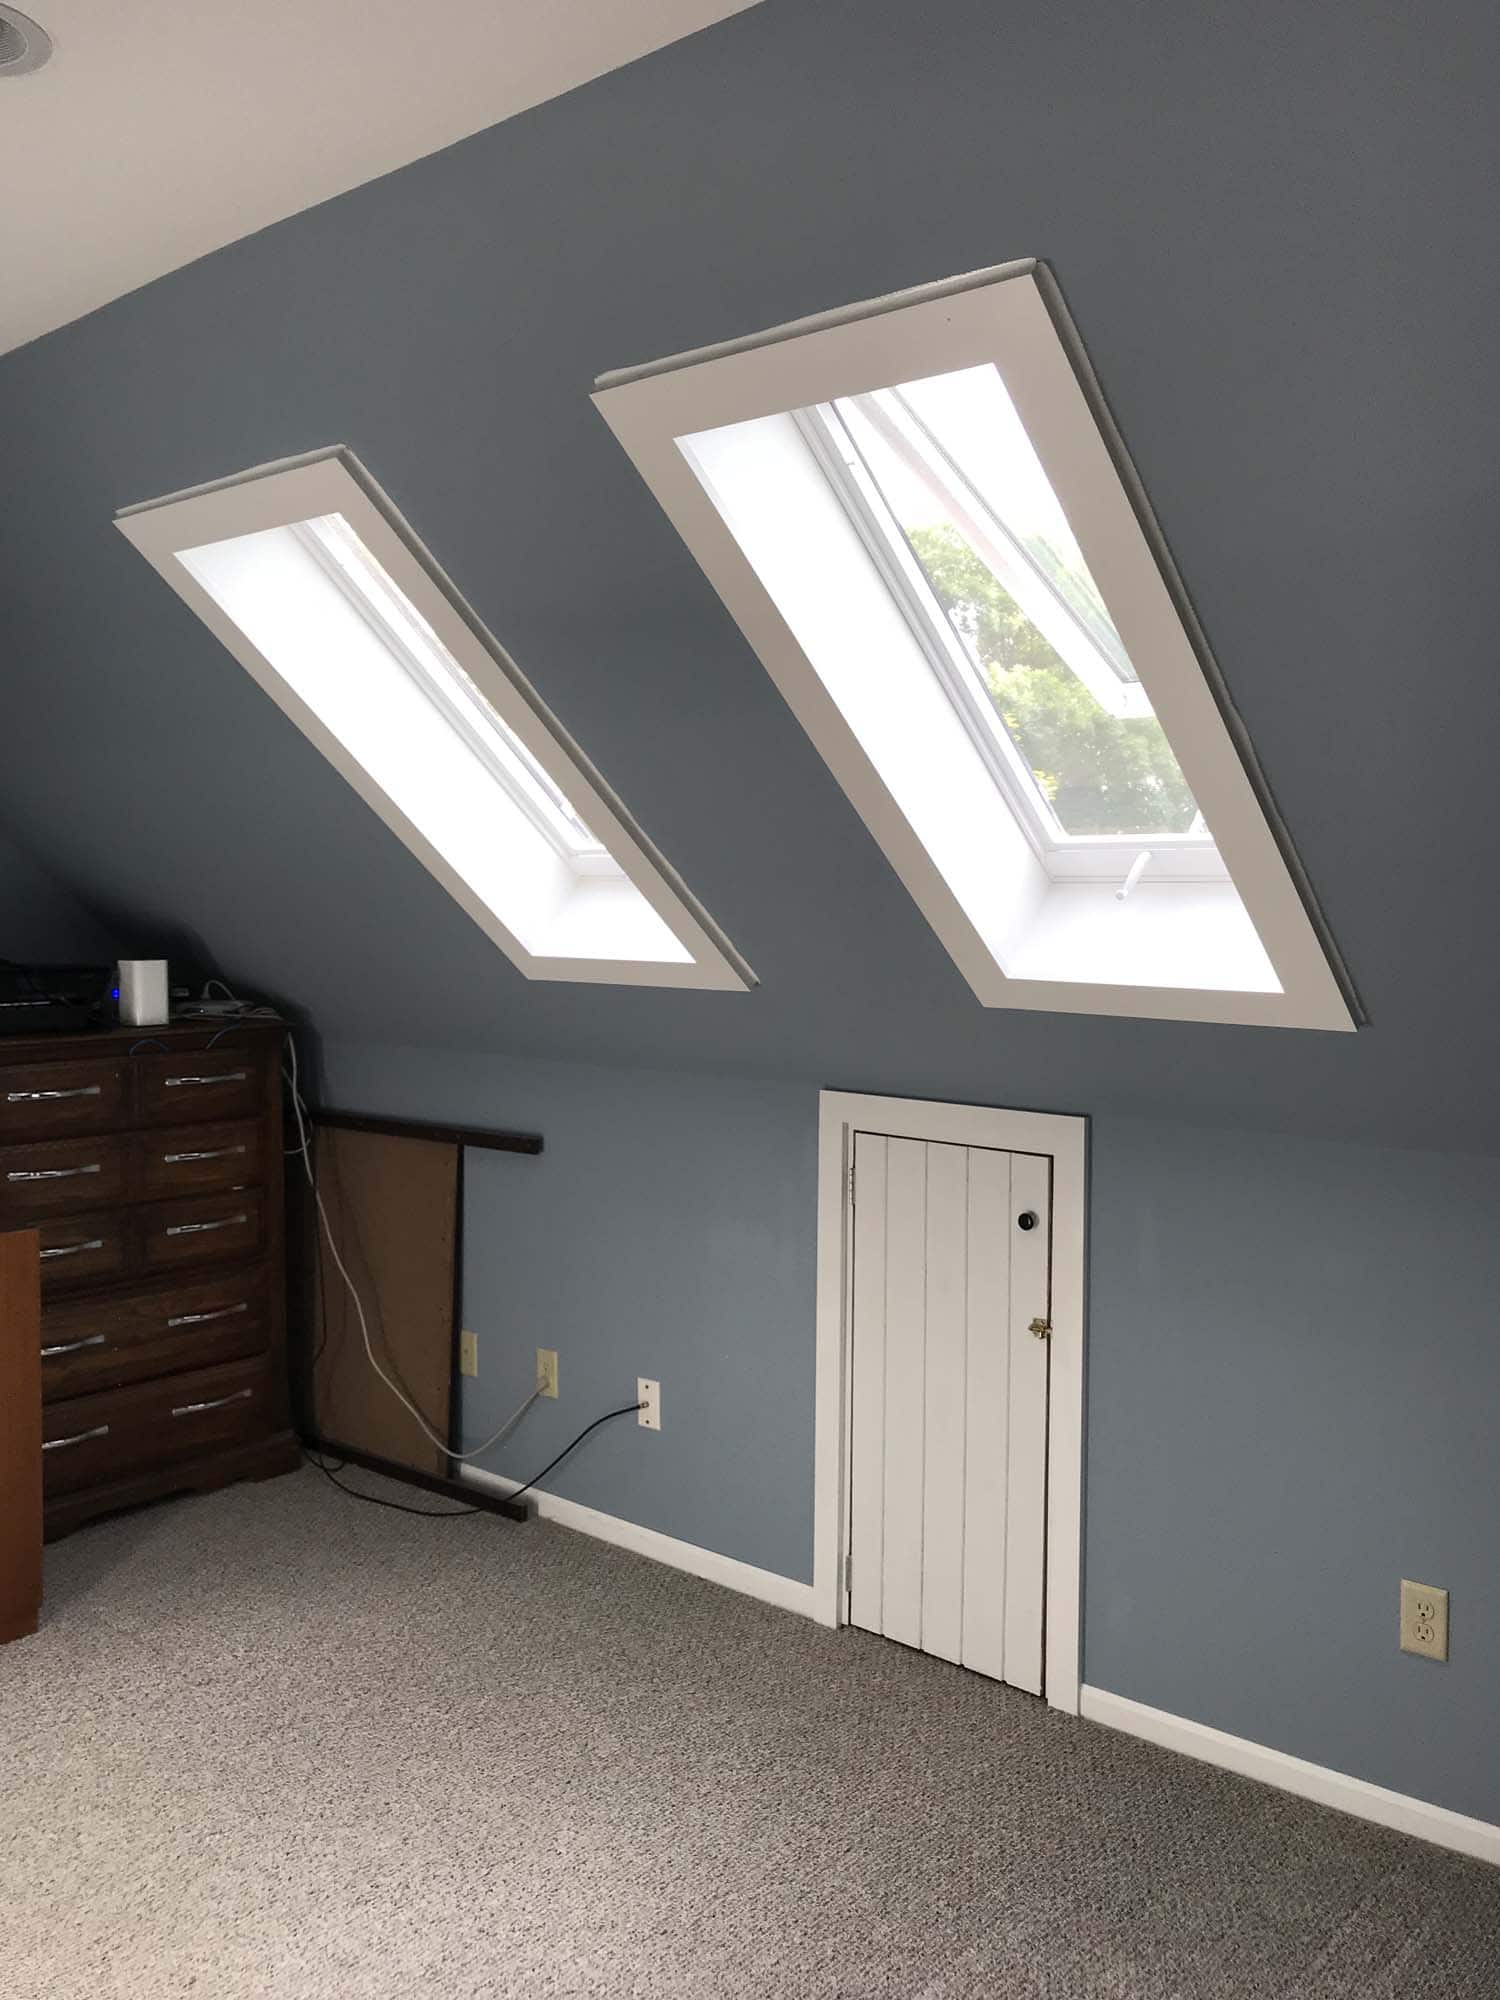 Two rectangular VELUX skylights looking in on a light blue room installed by Wisconsin Sunlight Solutions.